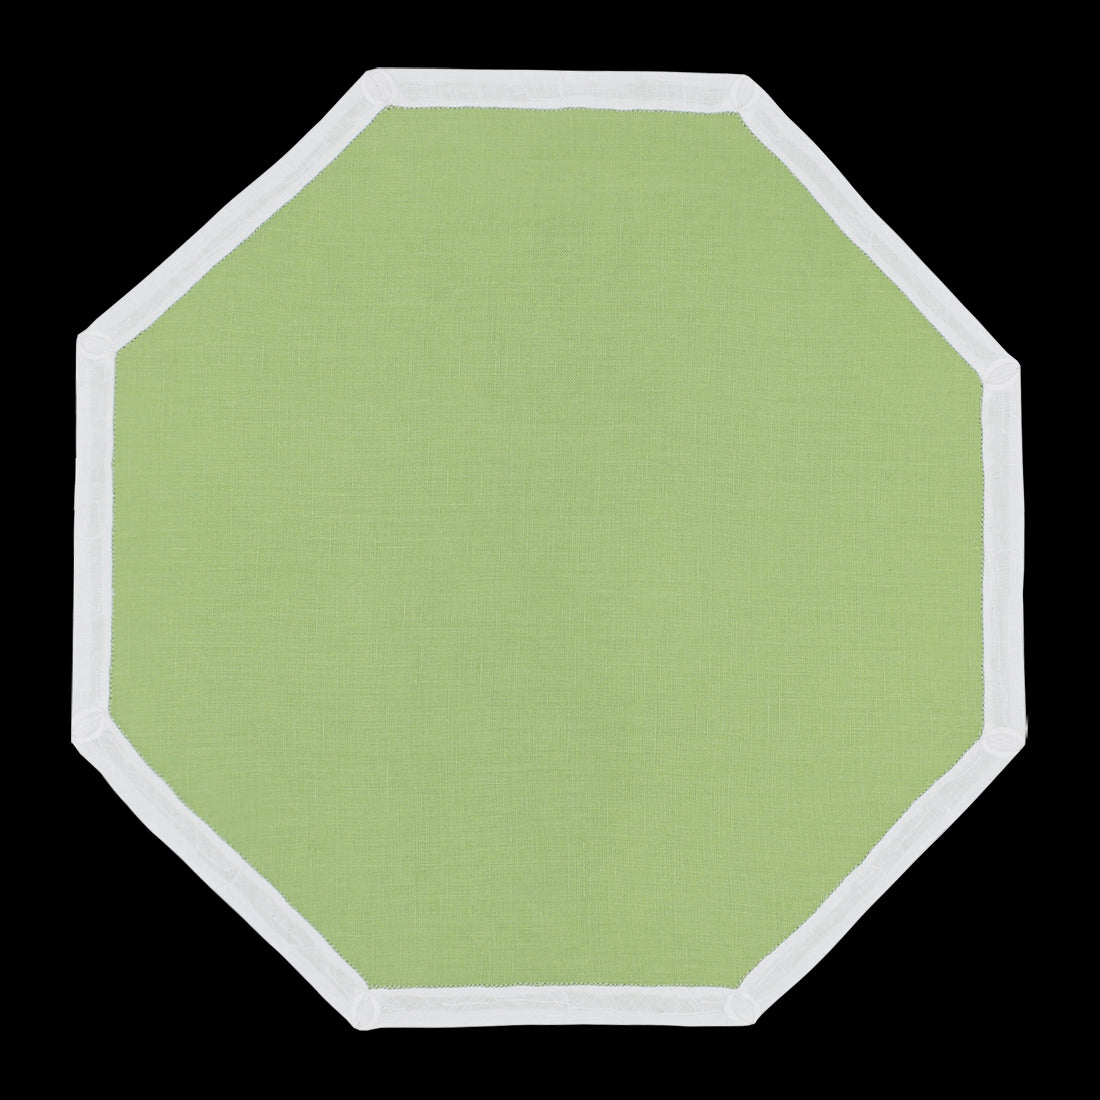 Bamboo Placemat in Lime, Set of 2